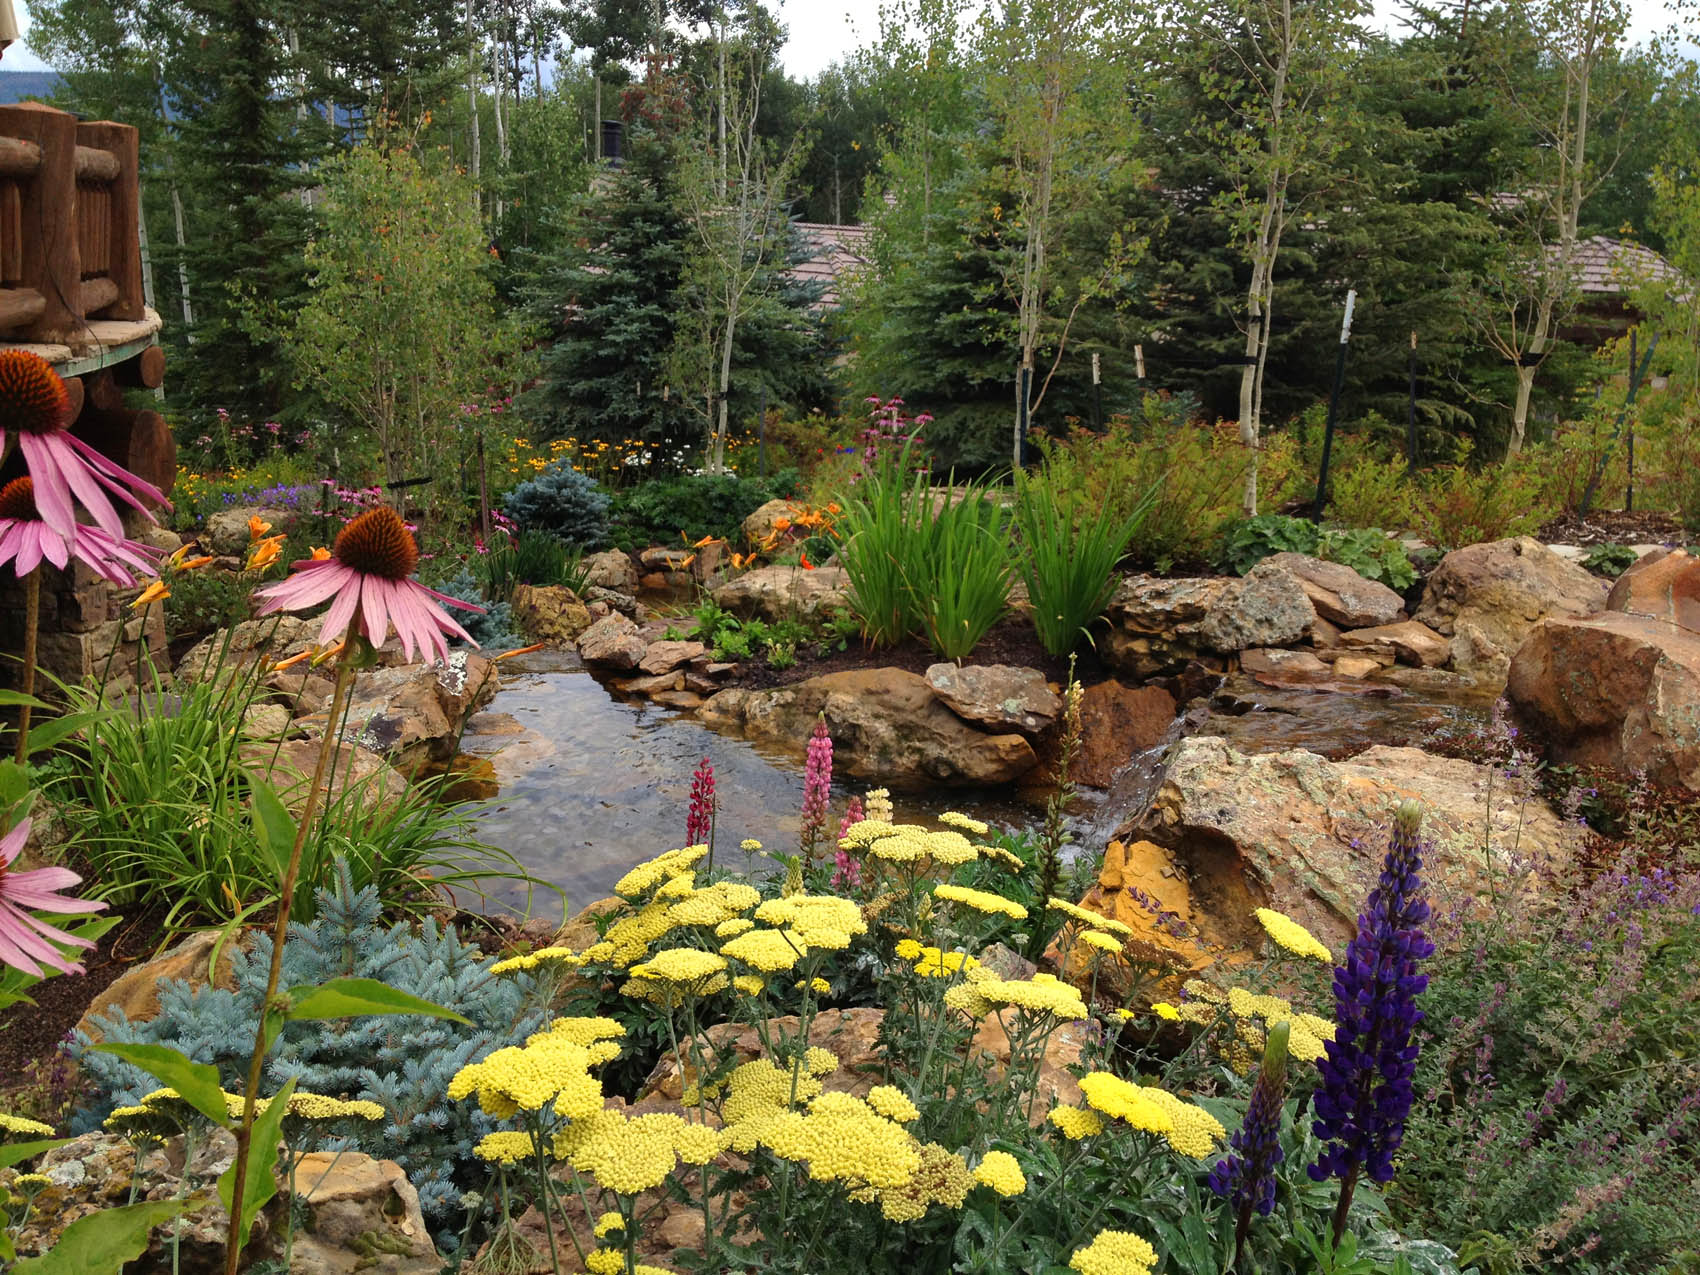 A tranquil garden featuring a small stream, vibrant yellow, purple, and pink flowers, lush greenery, and assorted rocks with trees in the background.